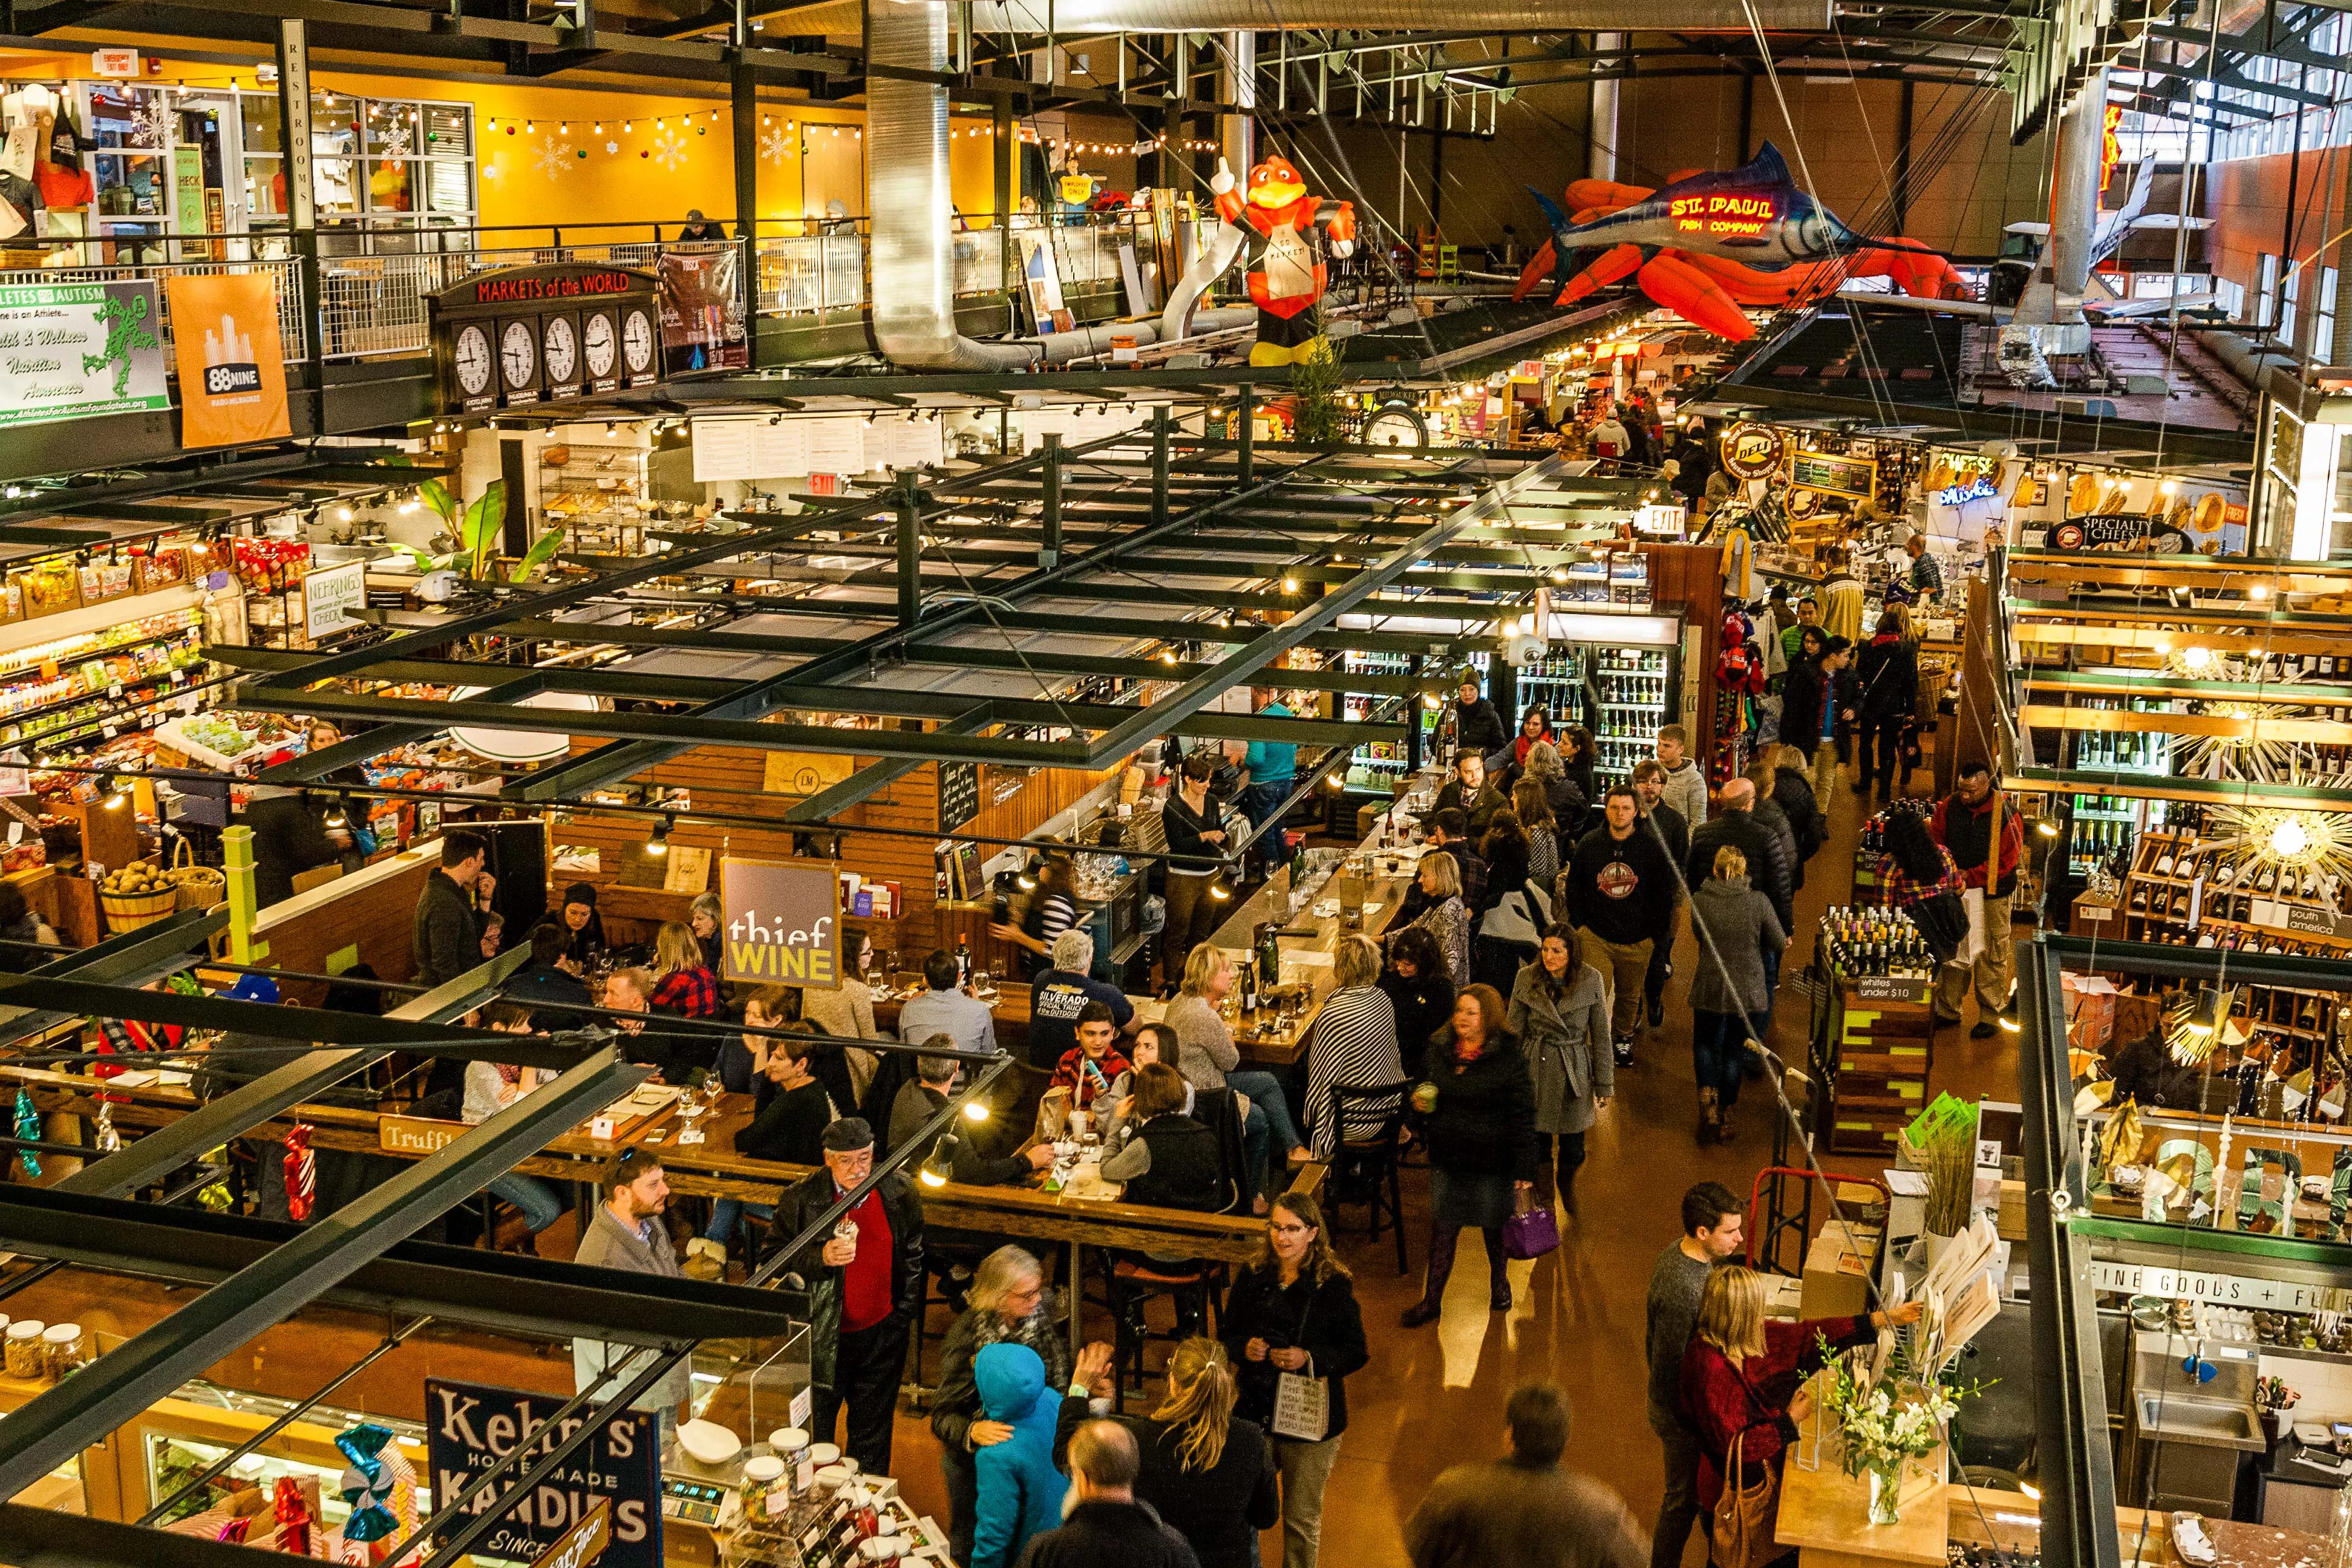 Milwaukee Public Market in USA, North America | Architecture,Street Food - Rated 4.5